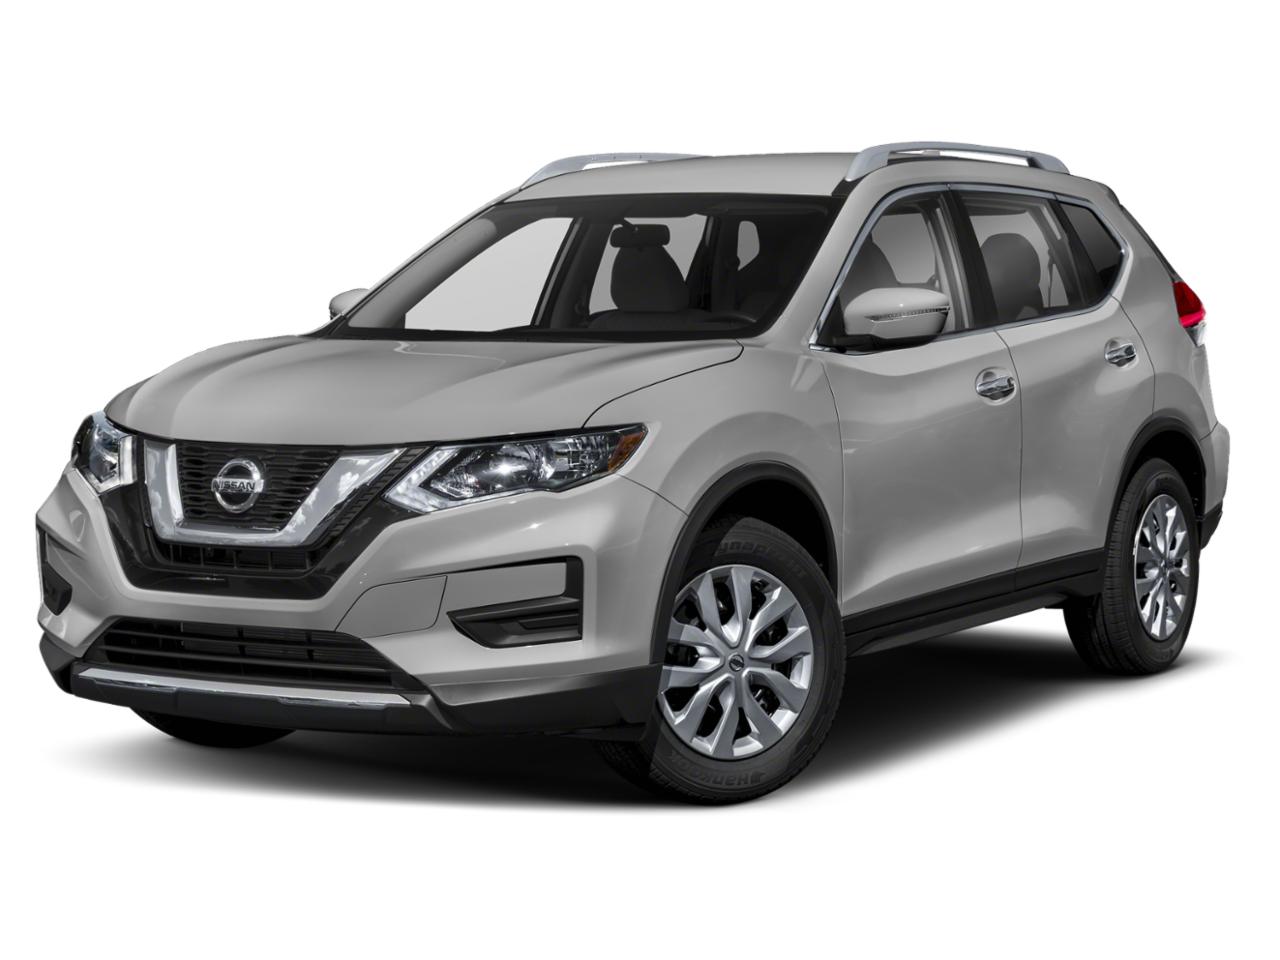 2017 Nissan Rogue Vehicle Photo in Appleton, WI 54913